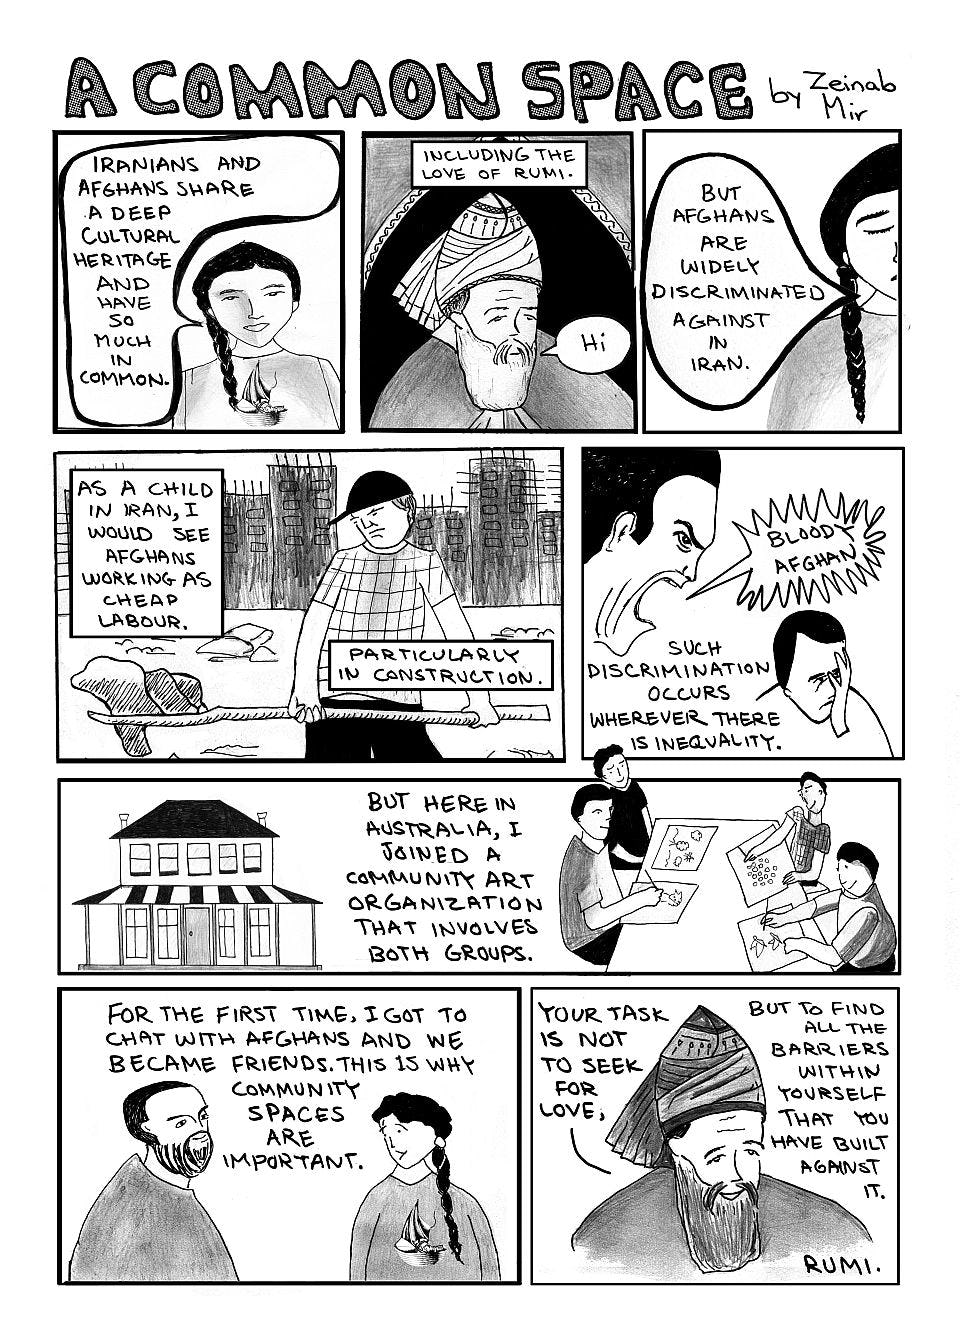 Zeinab Mir’s one-page comic A Common Space